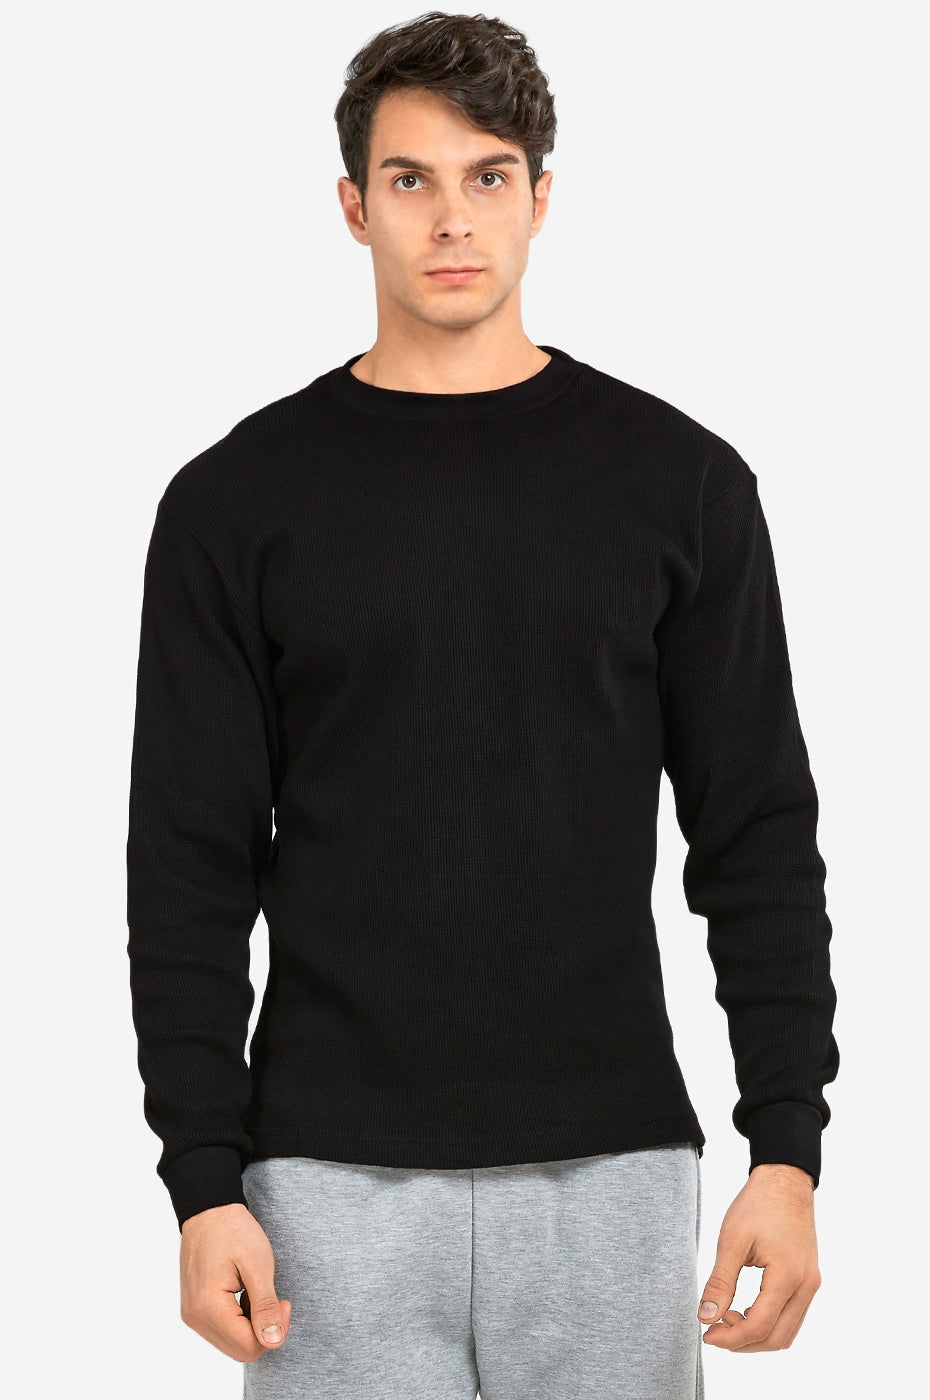 Men's Essentials Knocker Classic Breathable Cotton Waffle Knit Texture Thermal Top (KHT001_ BLK)